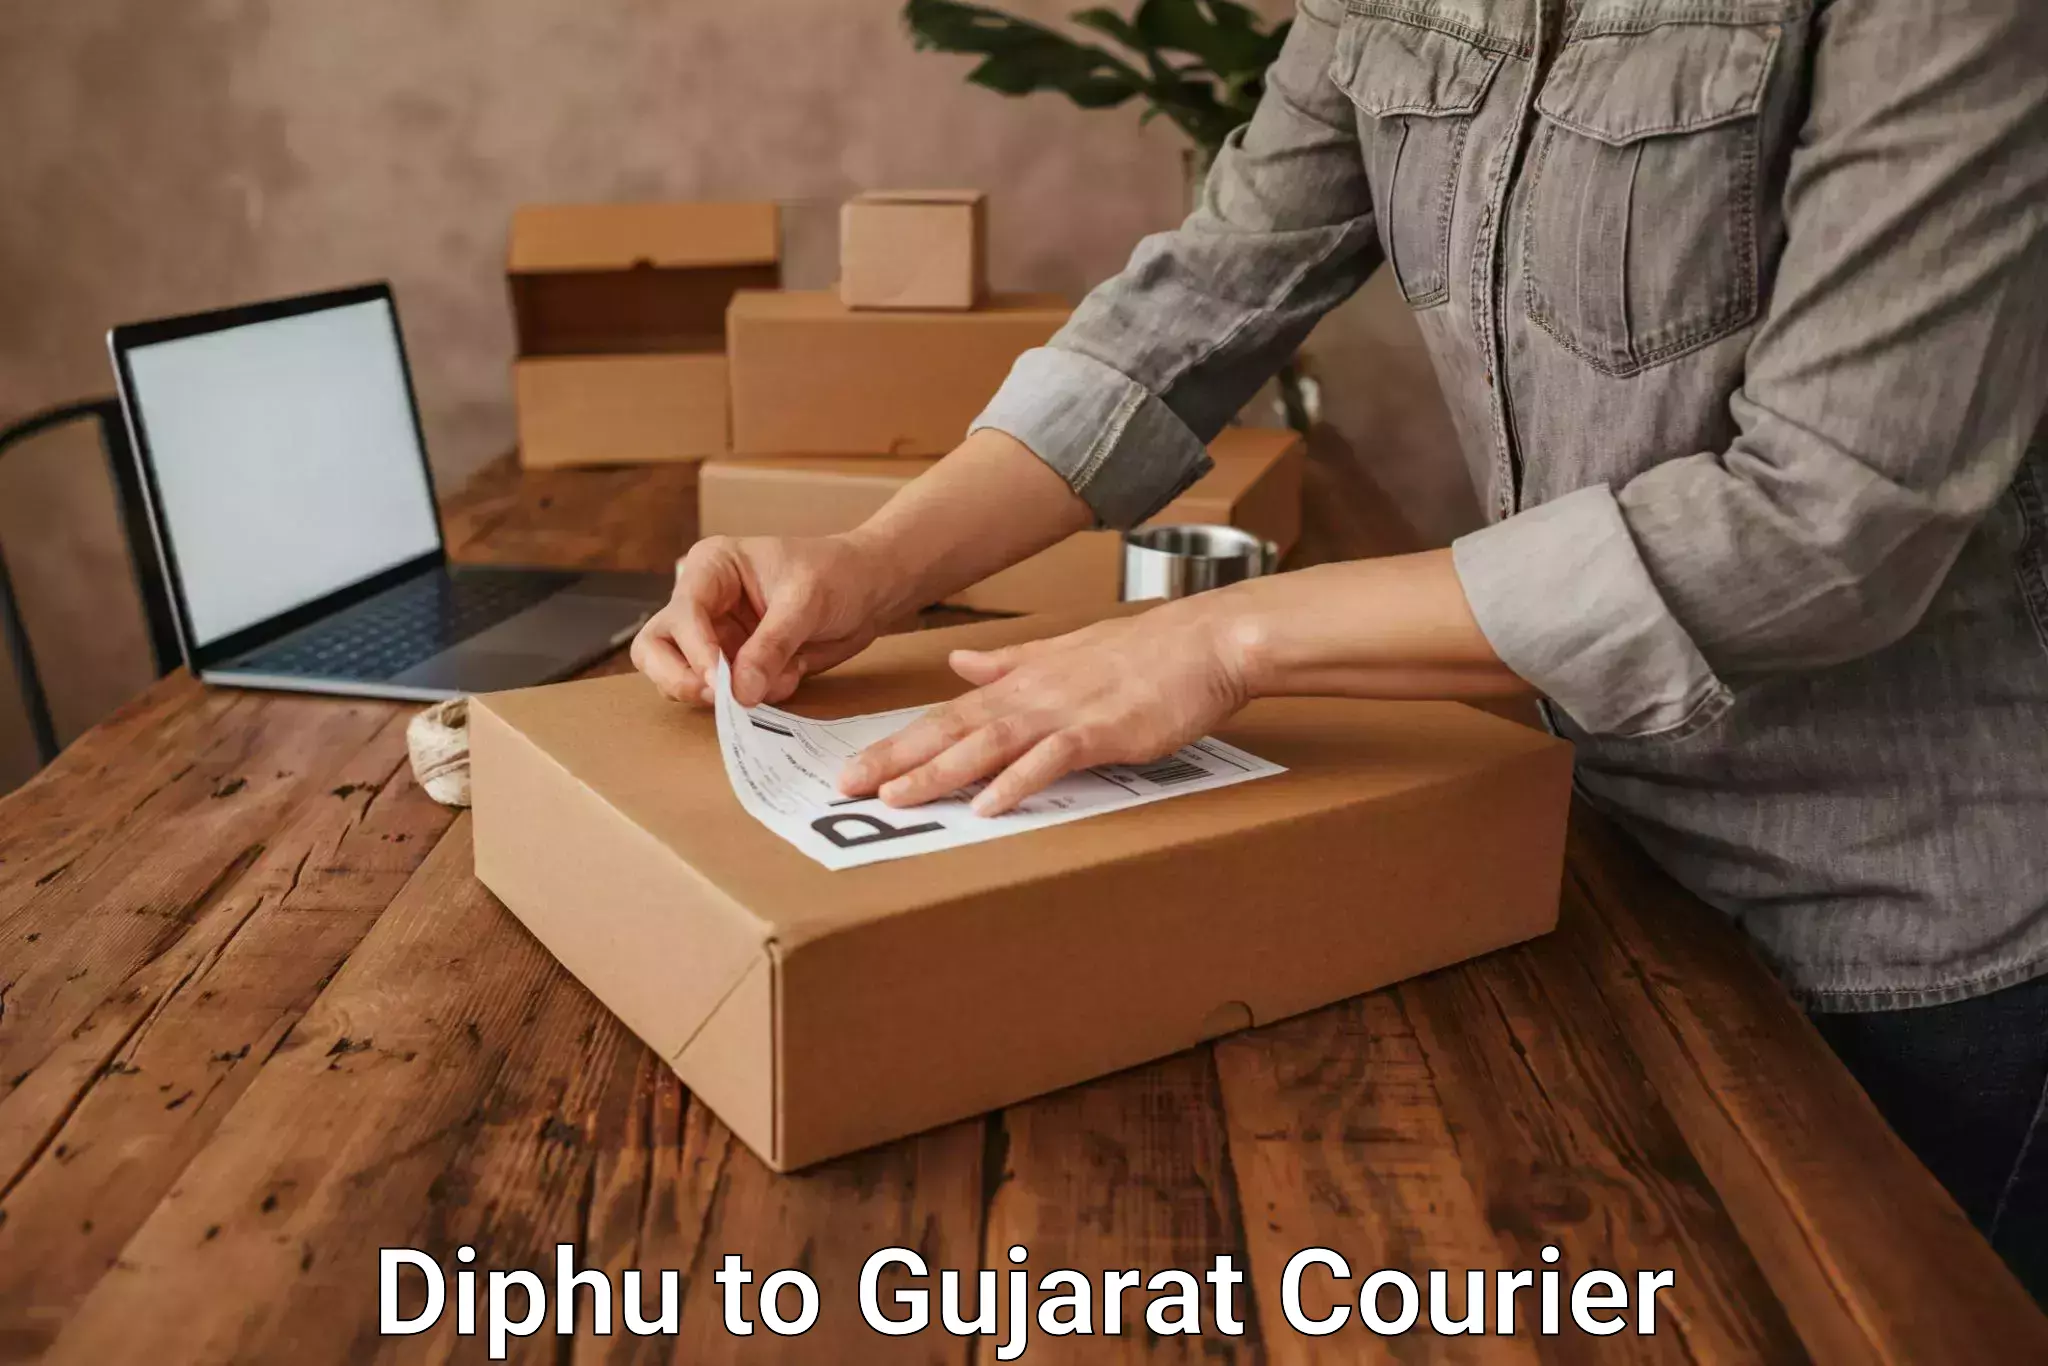 Cargo delivery service Diphu to Gujarat